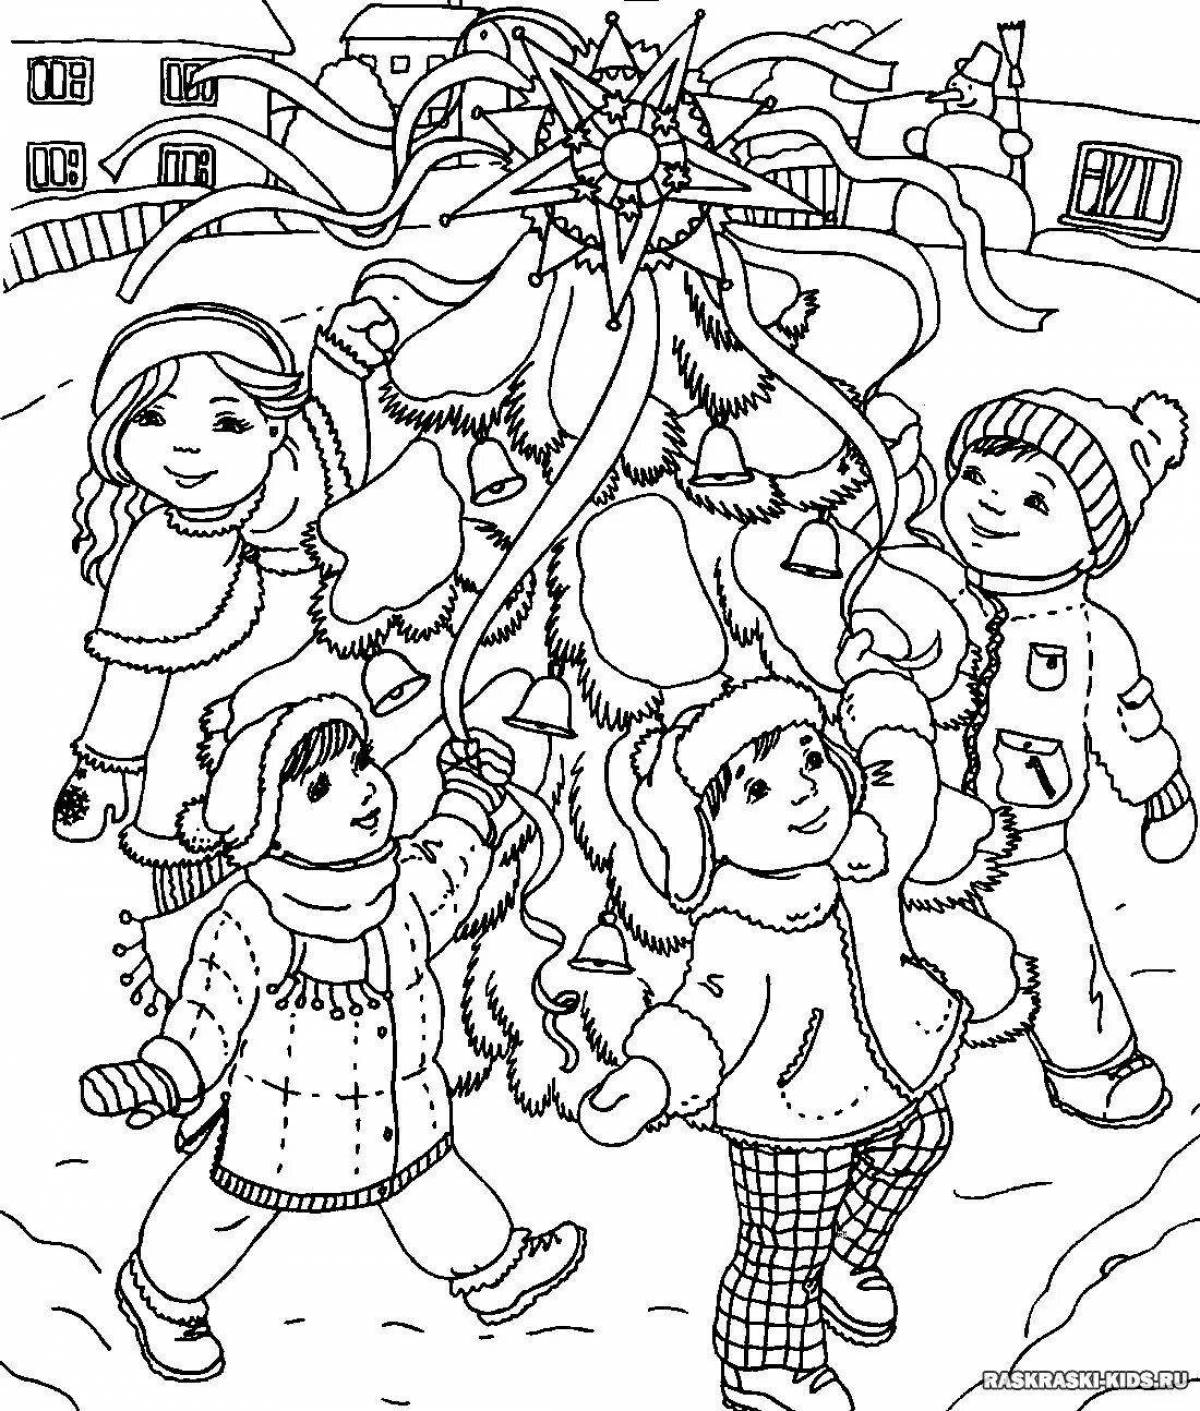 Amazing Christmas coloring pages for kids